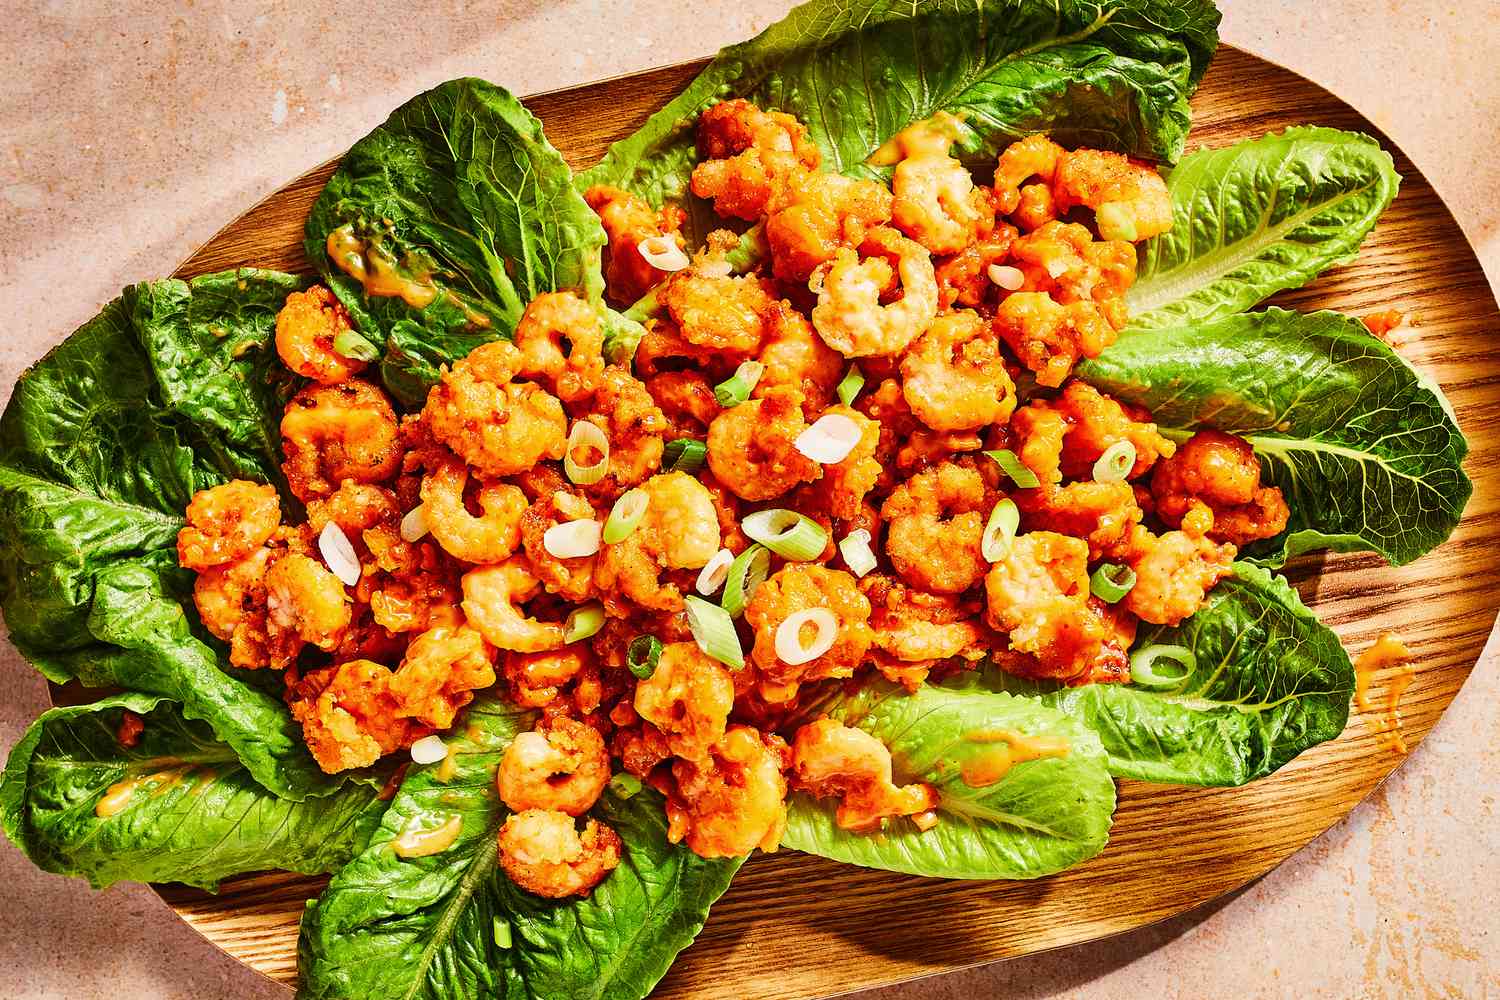 A platter of bang bang shrimp served on lettuce, topped with sliced scallions